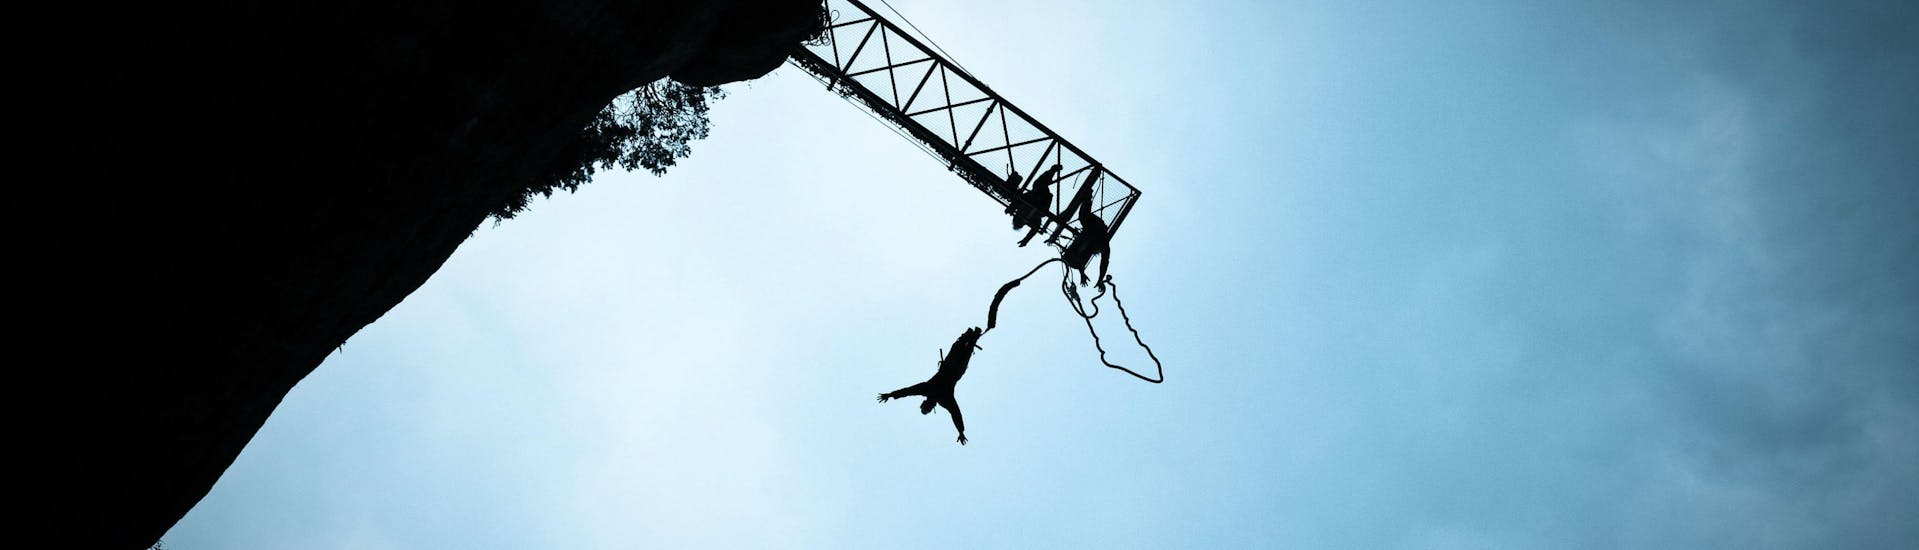 A man is jumping during his Bungee Jumping activity with Elastic Natural Bungee.